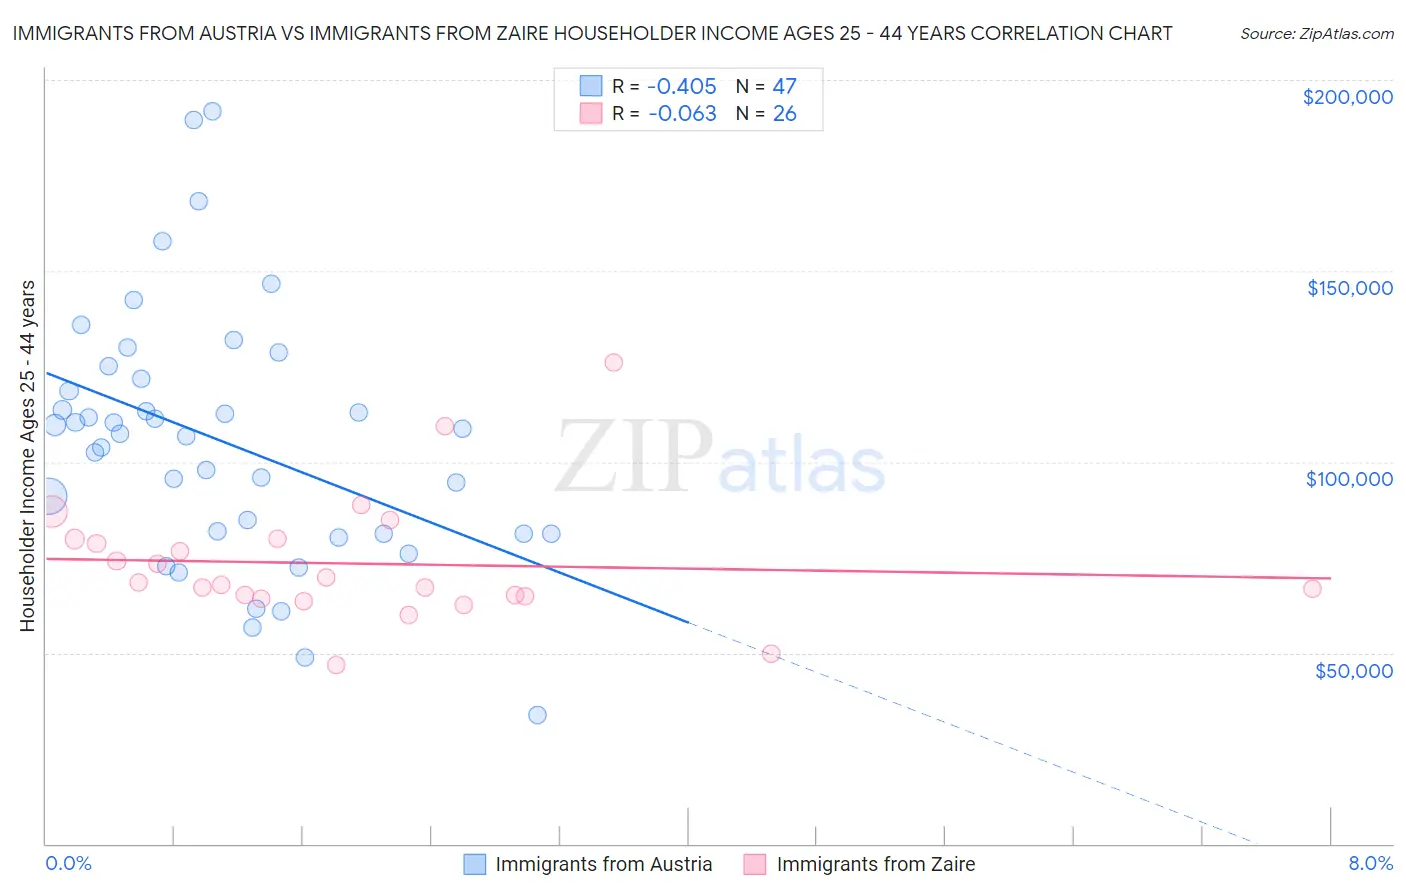 Immigrants from Austria vs Immigrants from Zaire Householder Income Ages 25 - 44 years